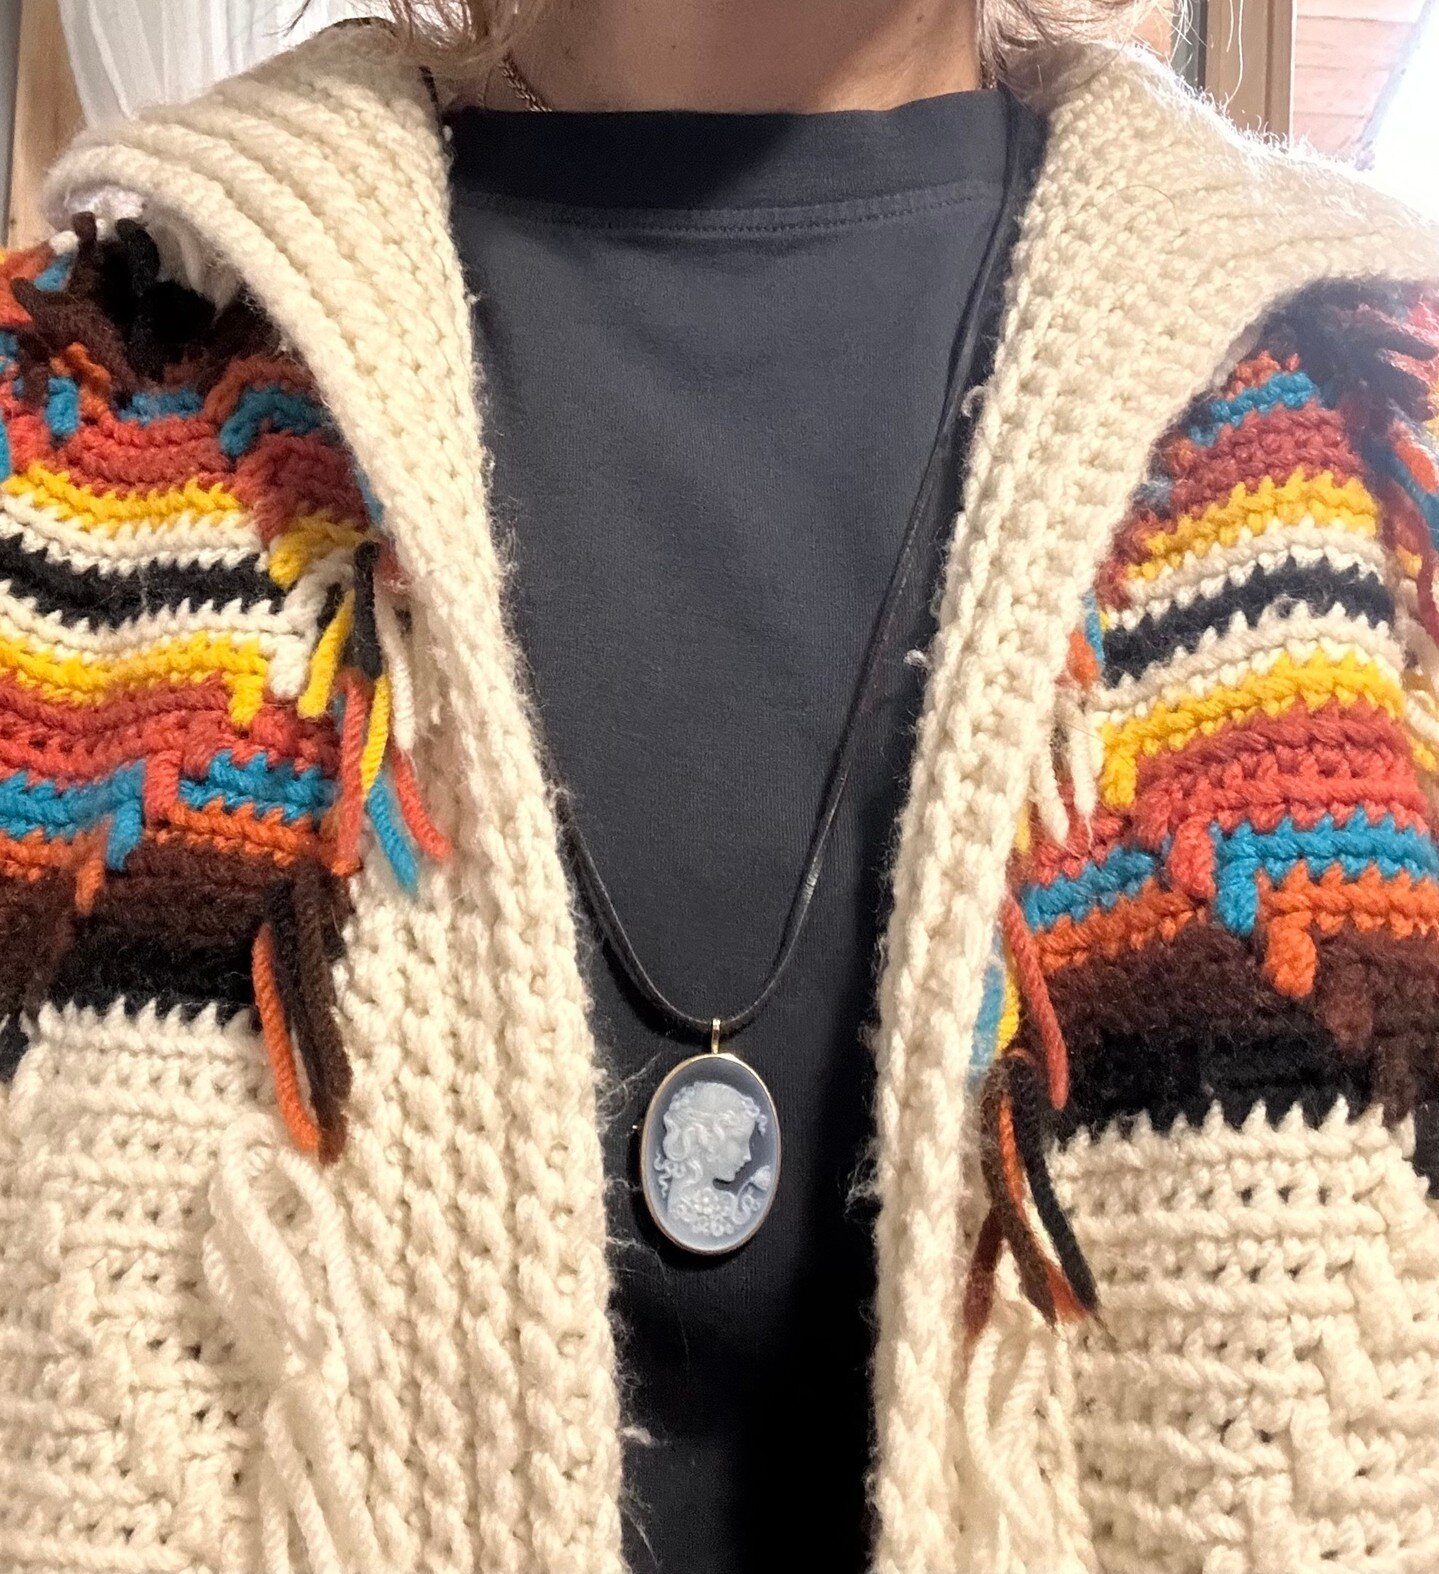 #TipTuesday #shoplocal⁠
....⁠
My friends give GOOD retail! Vintage sweater from @thevintageshow &amp; Italian Cameo necklace from @gioletti_bklyn (#comingsoon).⁠
....⁠
Love these ladies and am here for all their #RetailAdventures⁠
....⁠
#smallbusines